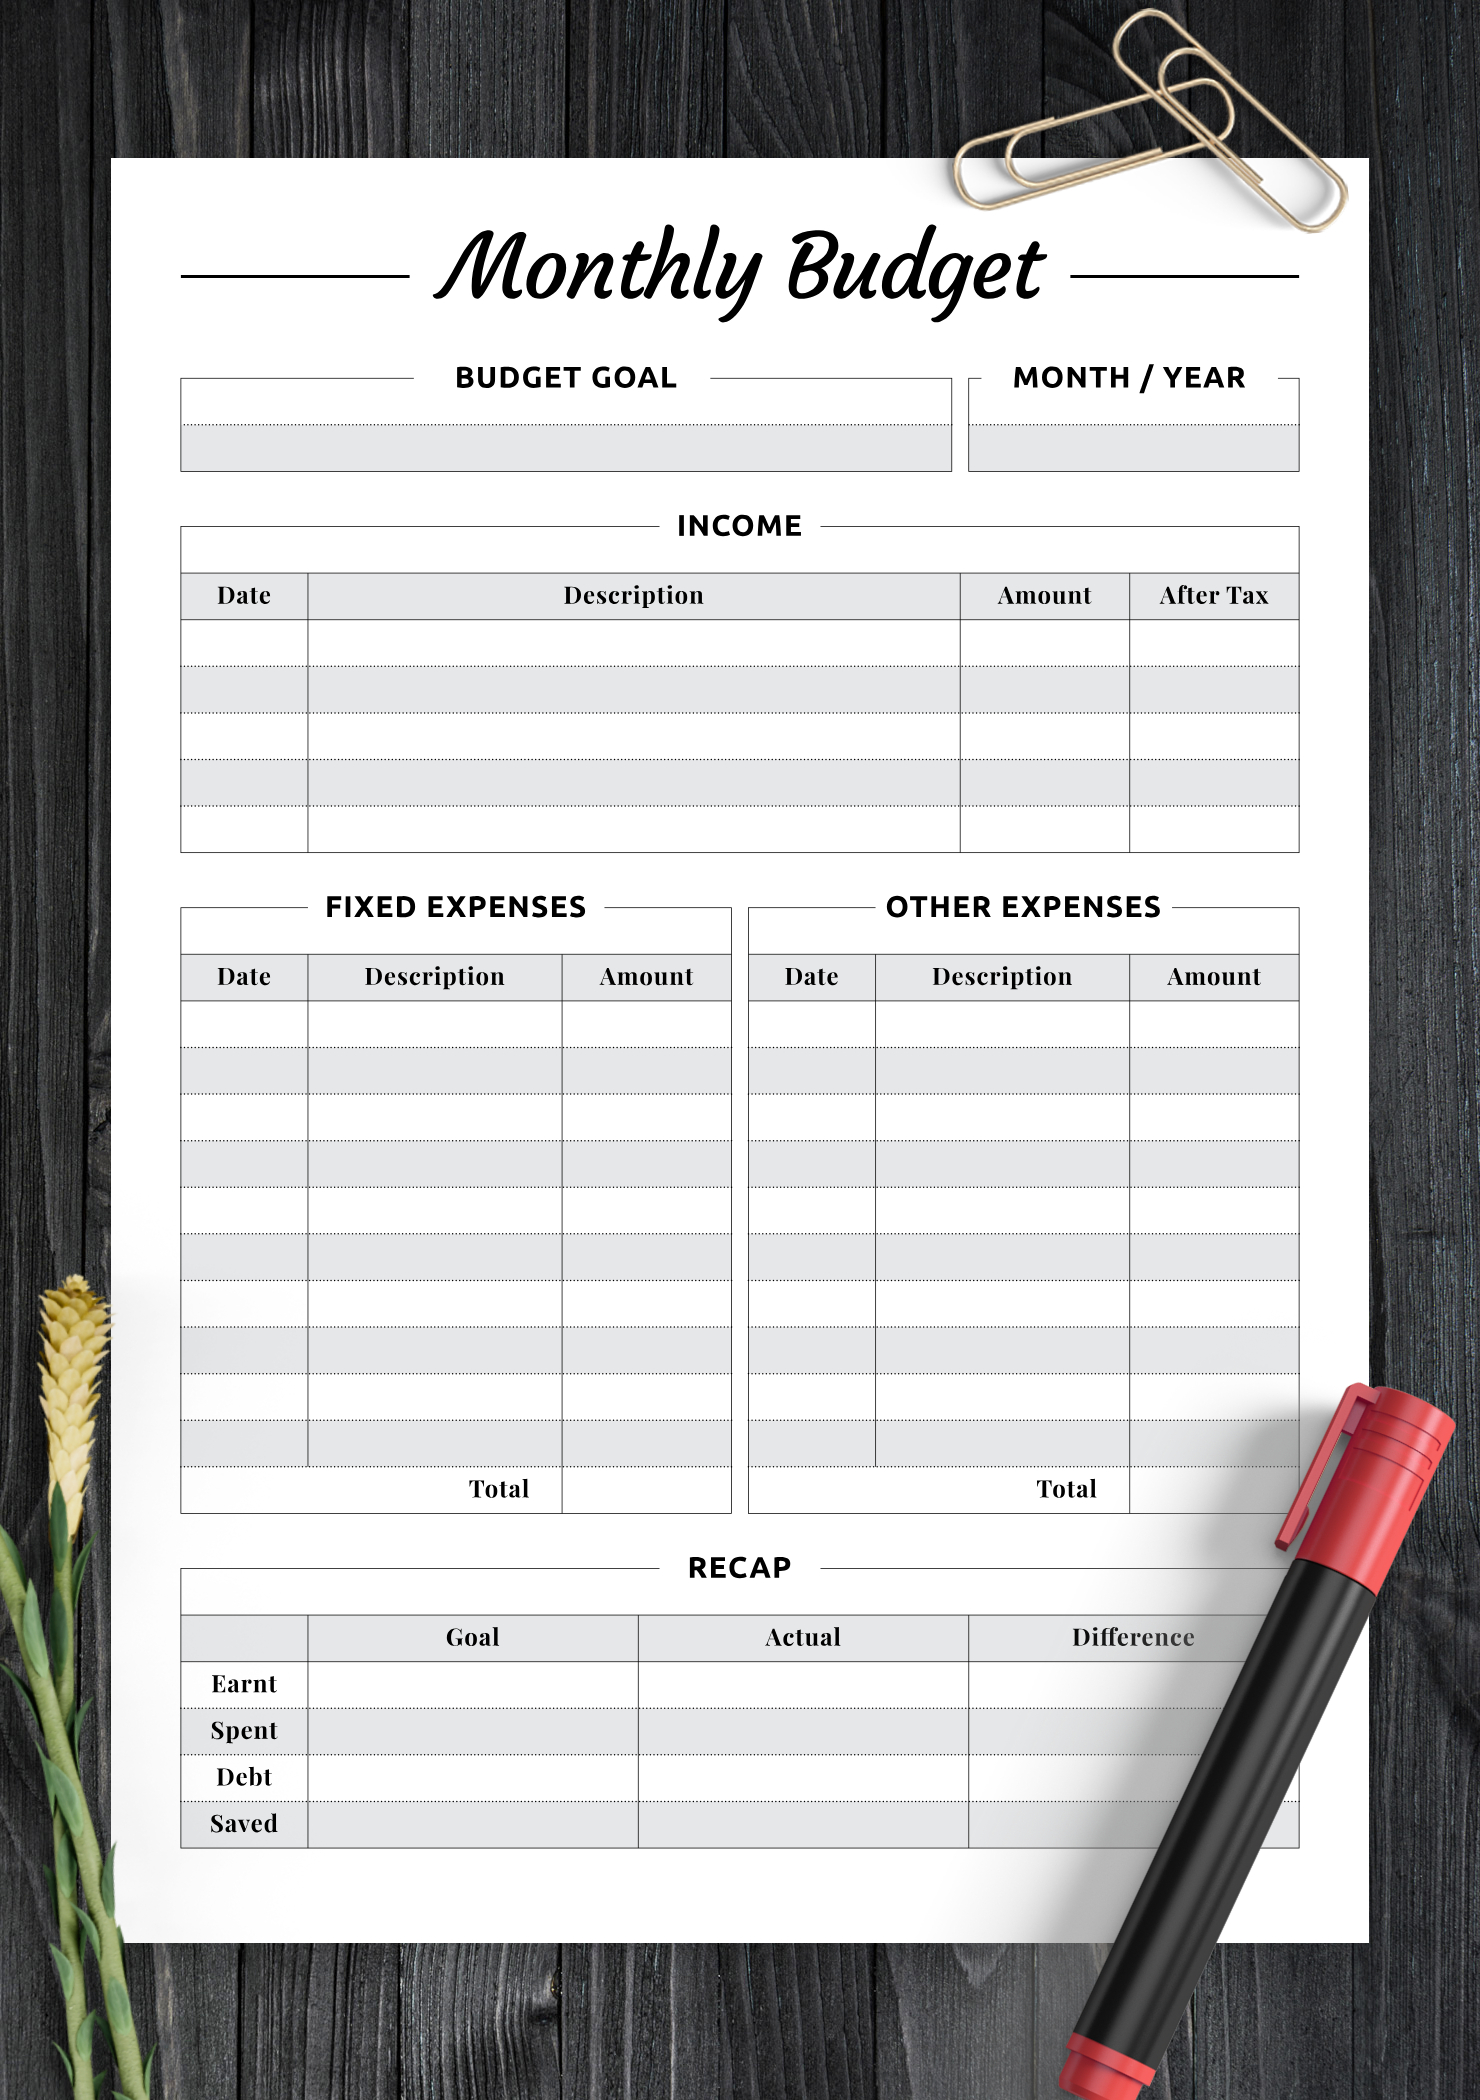 Download Printable Monthly Budget With Recap Section Pdf within Weekly Budget Planner Template Free